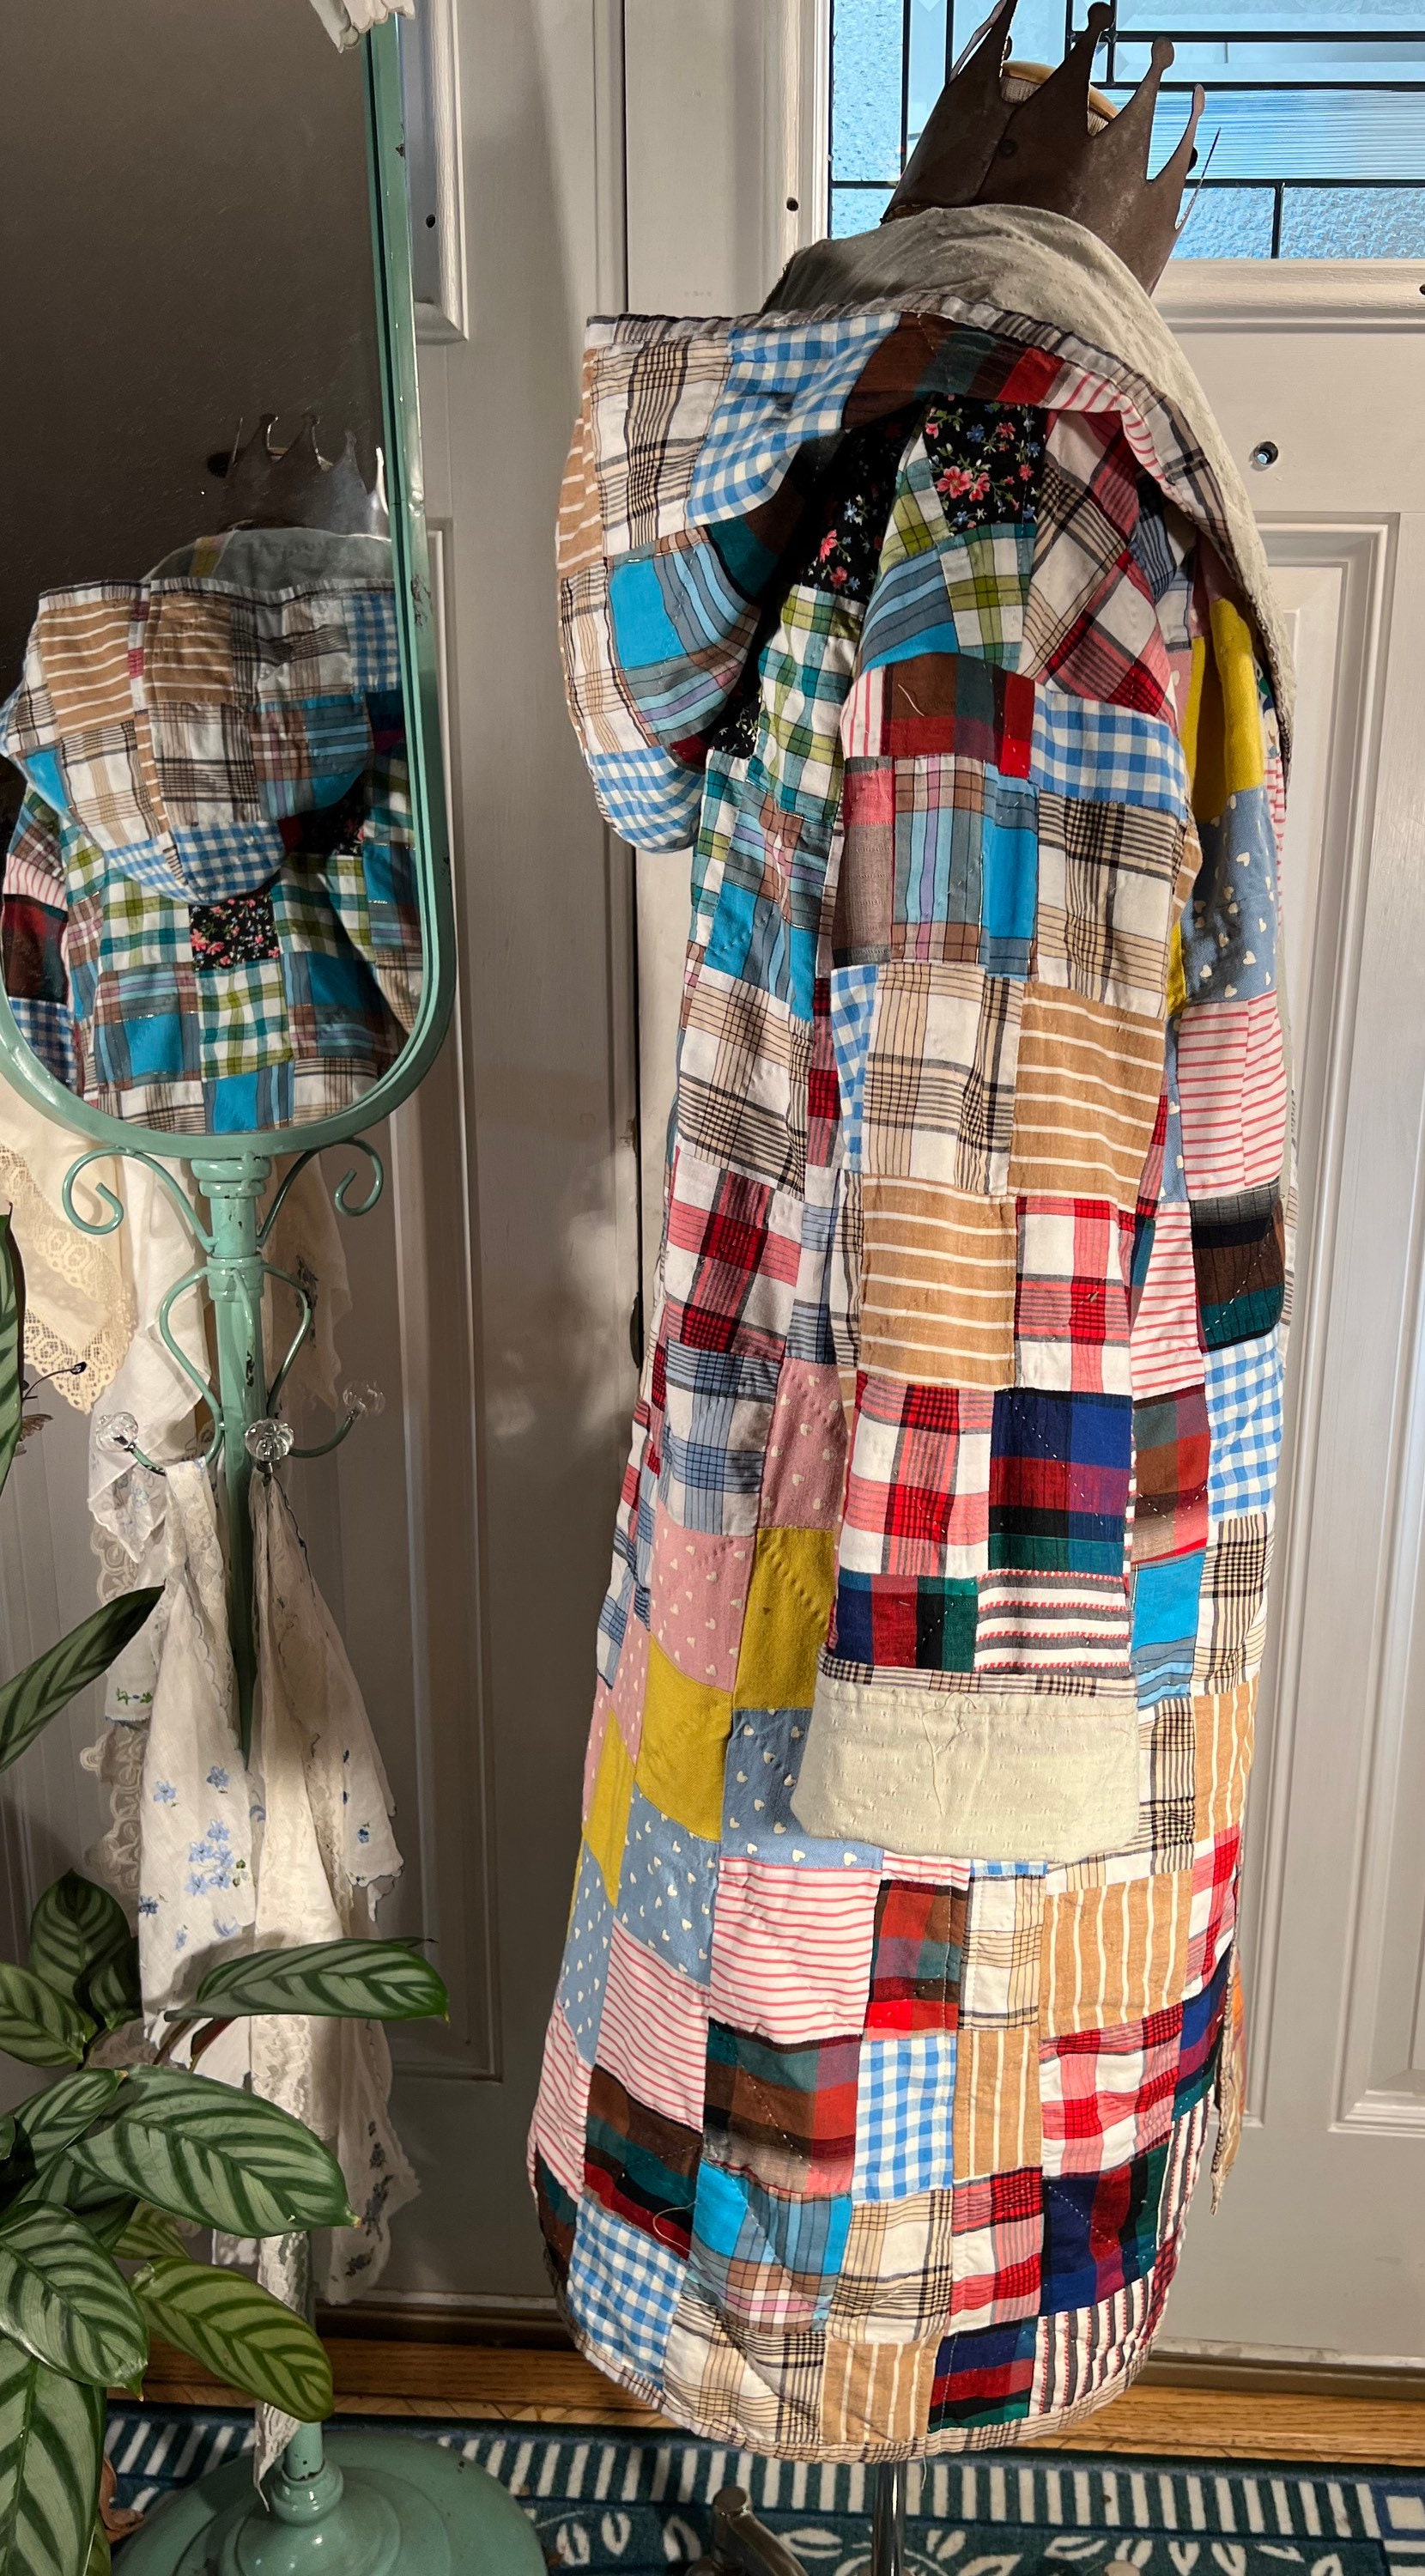 purchases onlinestore Medium 'Trip soft coat 'trip vintage around the  world' and quilt puffy patchwork coat with upcycled World' the Around from  from vintage patchwork patch hood work quilt soft 